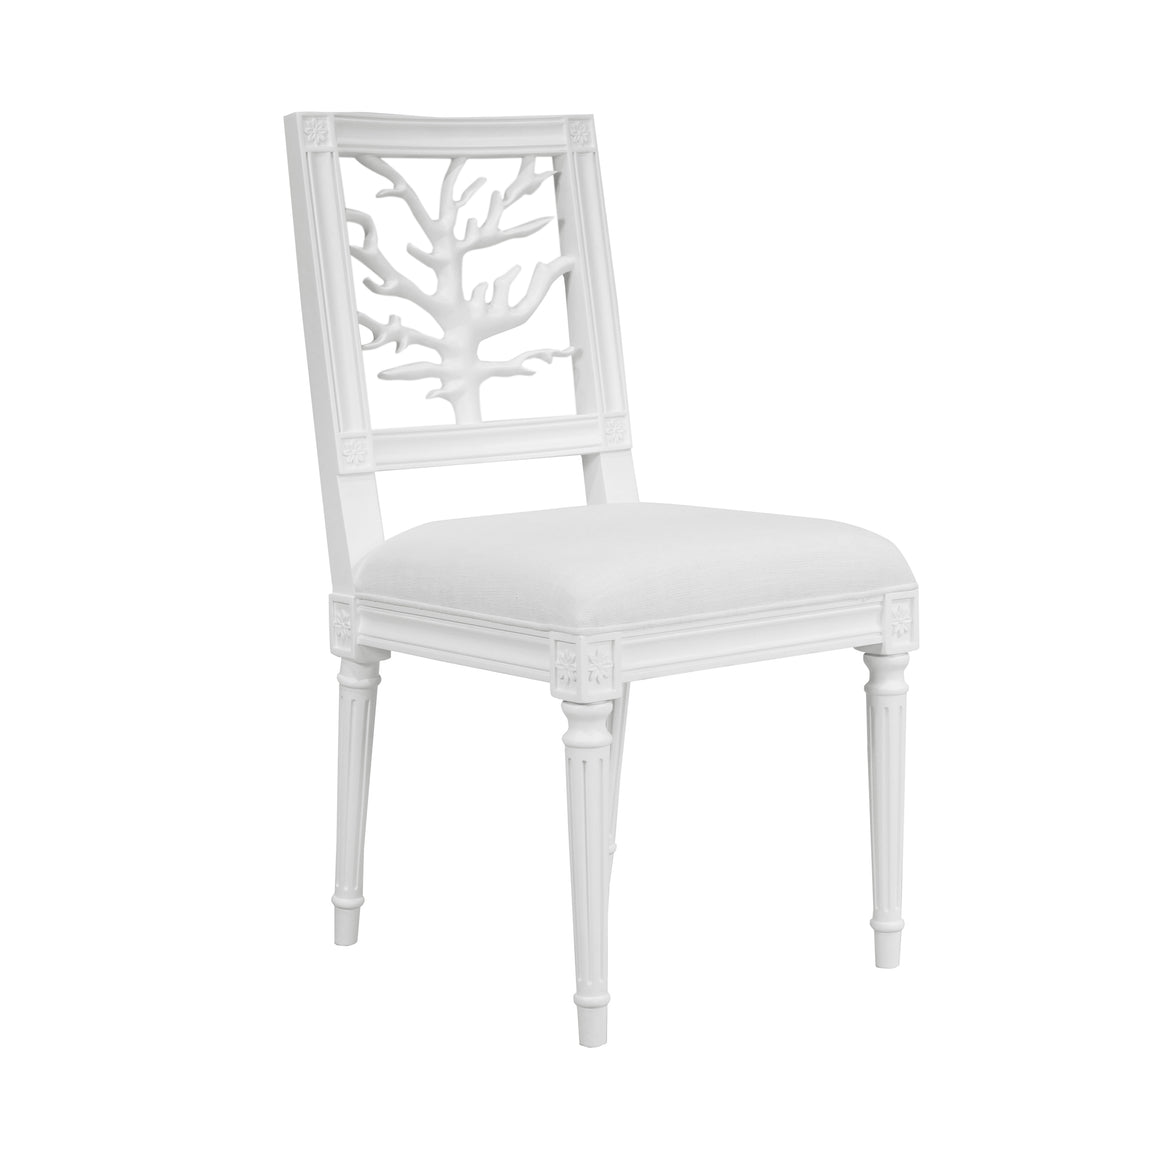 McKay Dining Chair in Matte White Lacquer